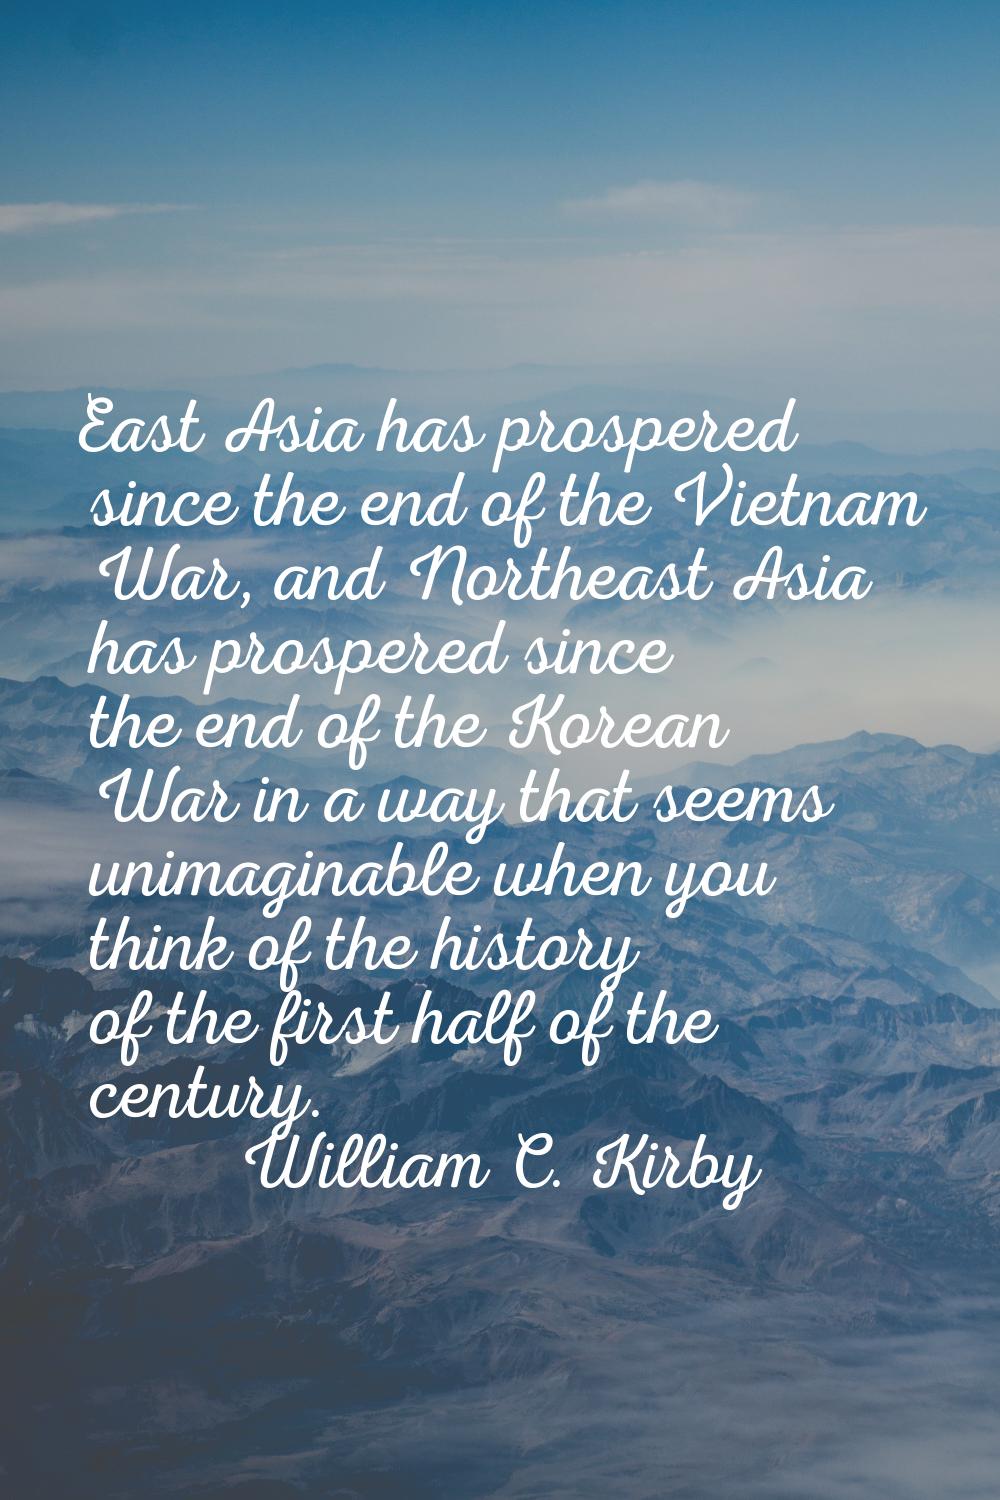 East Asia has prospered since the end of the Vietnam War, and Northeast Asia has prospered since th